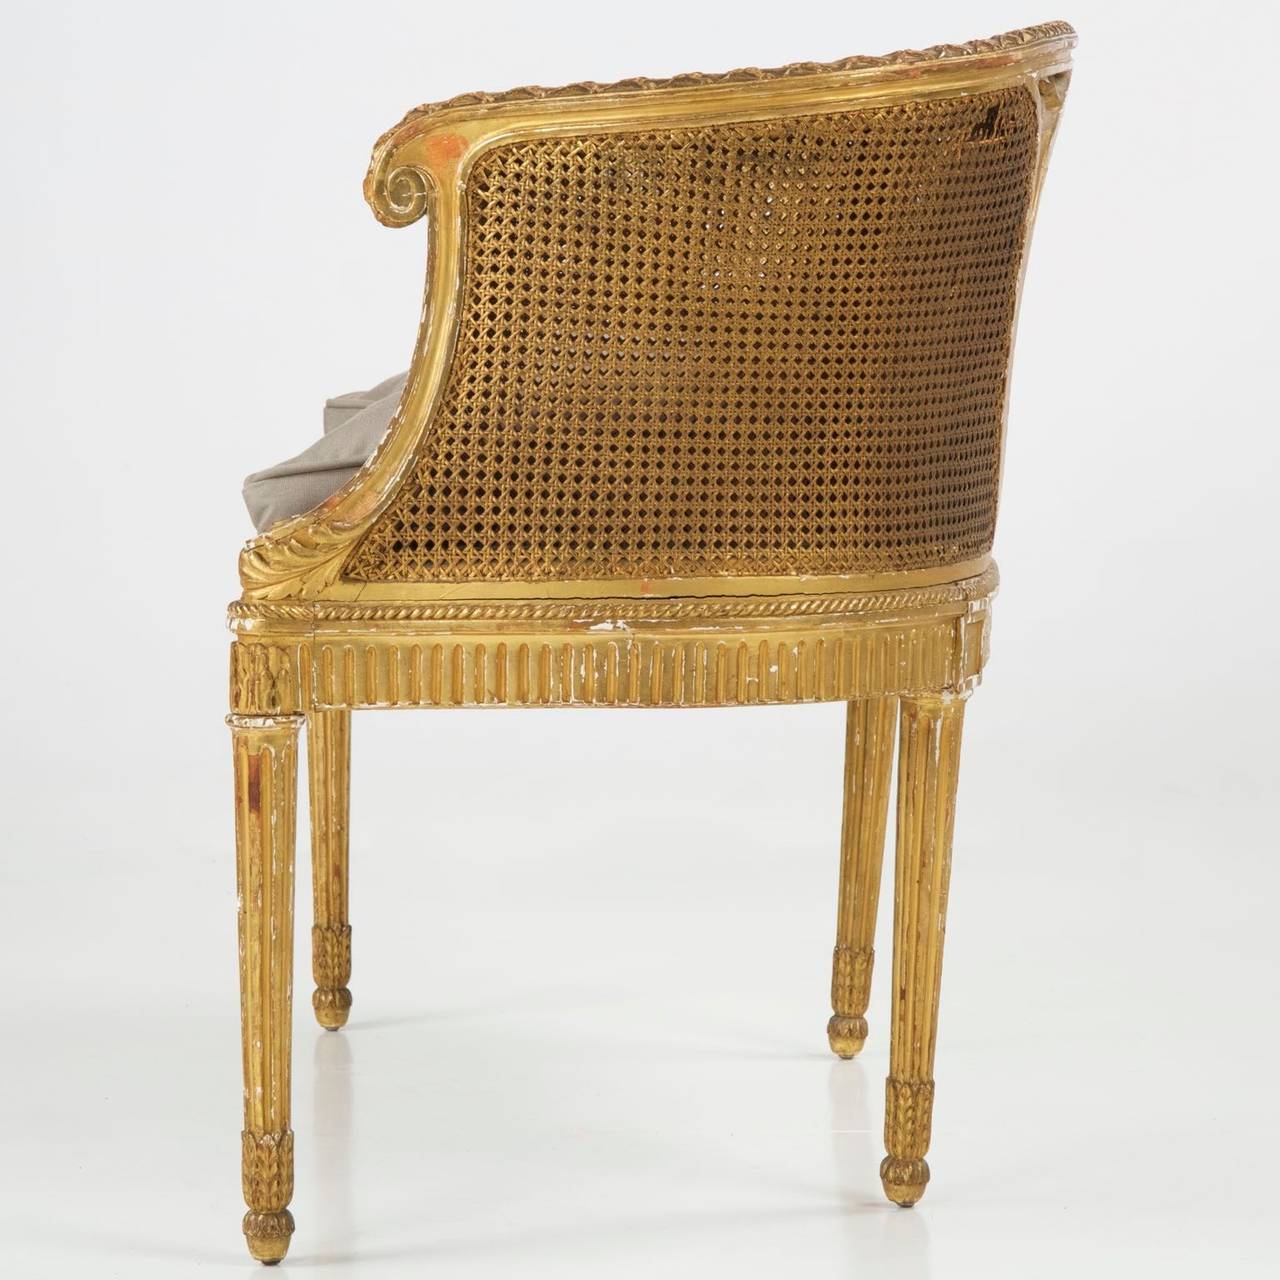 20th Century Small French Louis XVI Style Giltwood Upholstered Settee or Marquise c. 1900